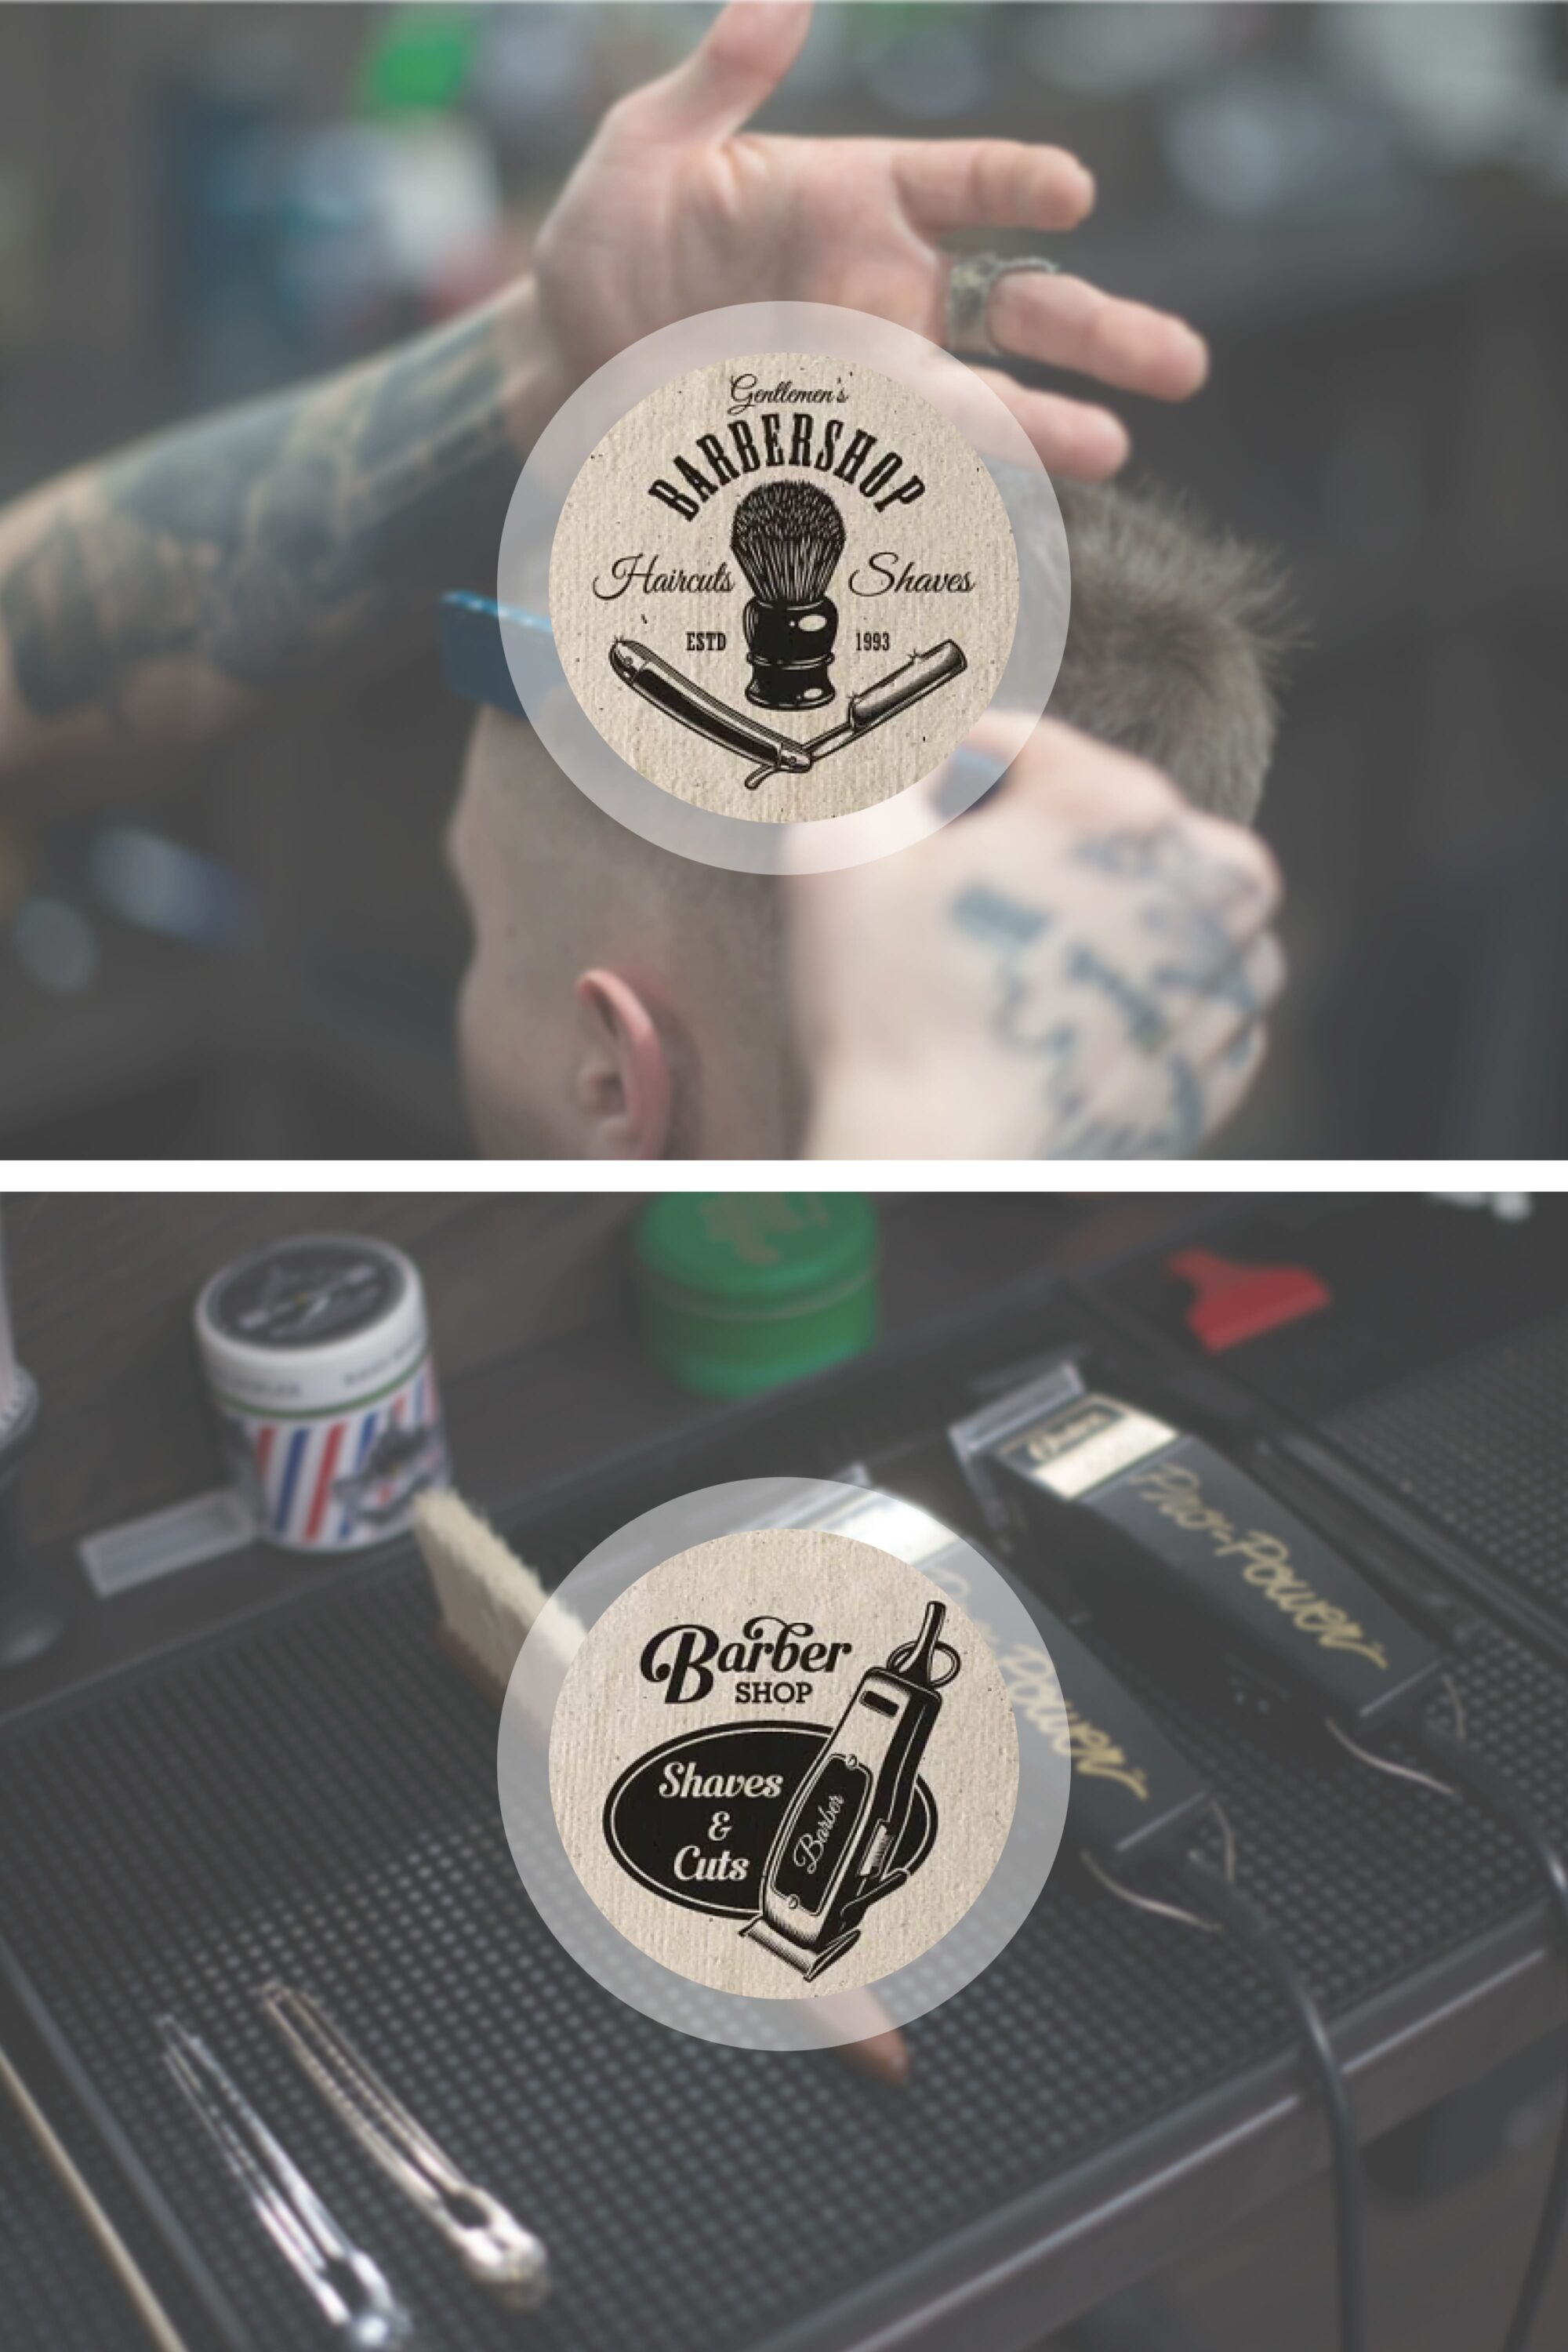 So big barber logos in a vintage style.